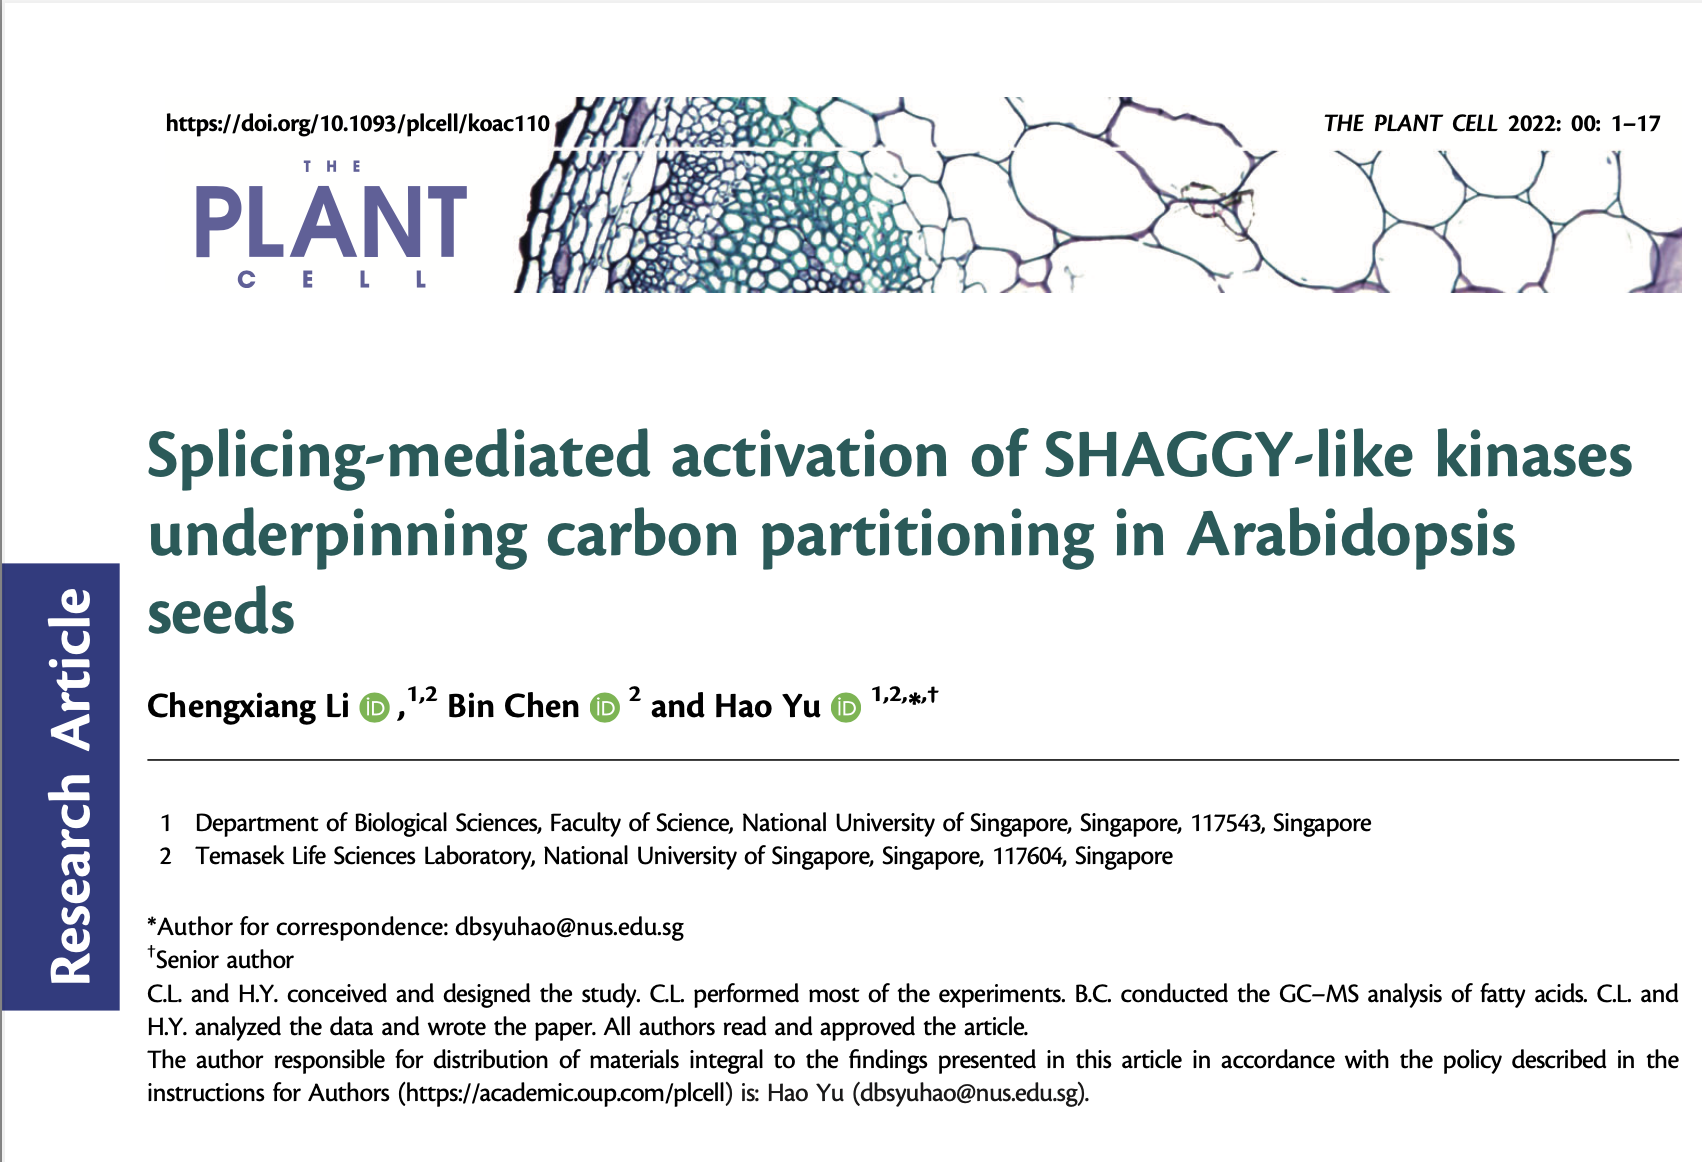 Splicing-mediated activation of SHAGGY-like kinases underpinning carbon partitioning in Arabidopsis seeds